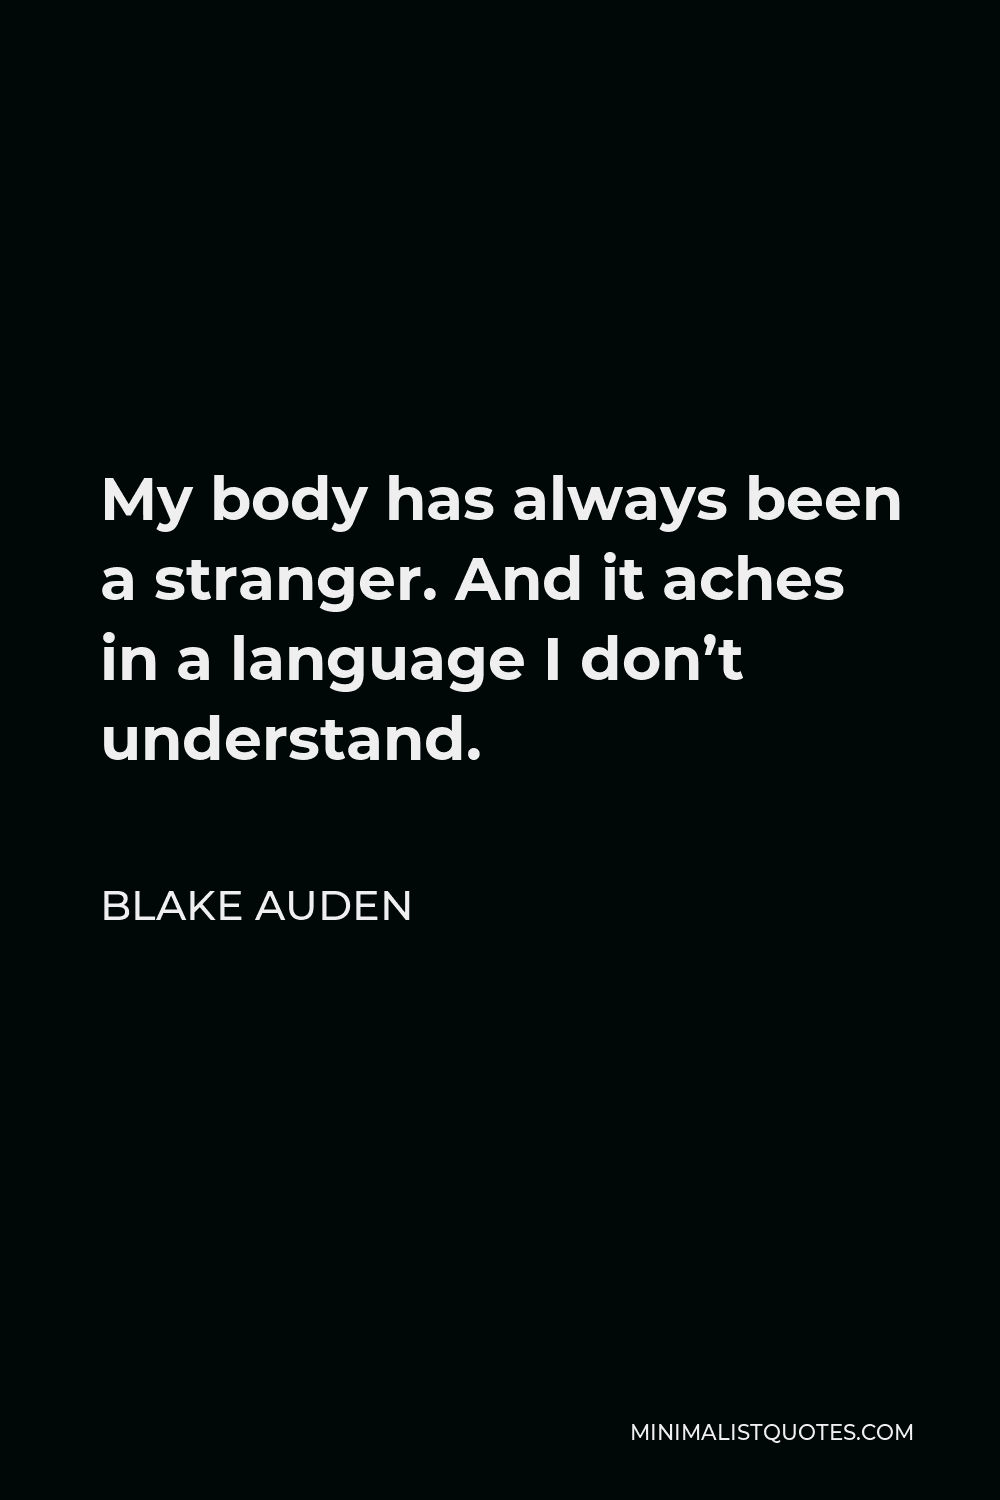 Blake Auden Quote - My body has always been a stranger. And it aches in a language I don’t understand.